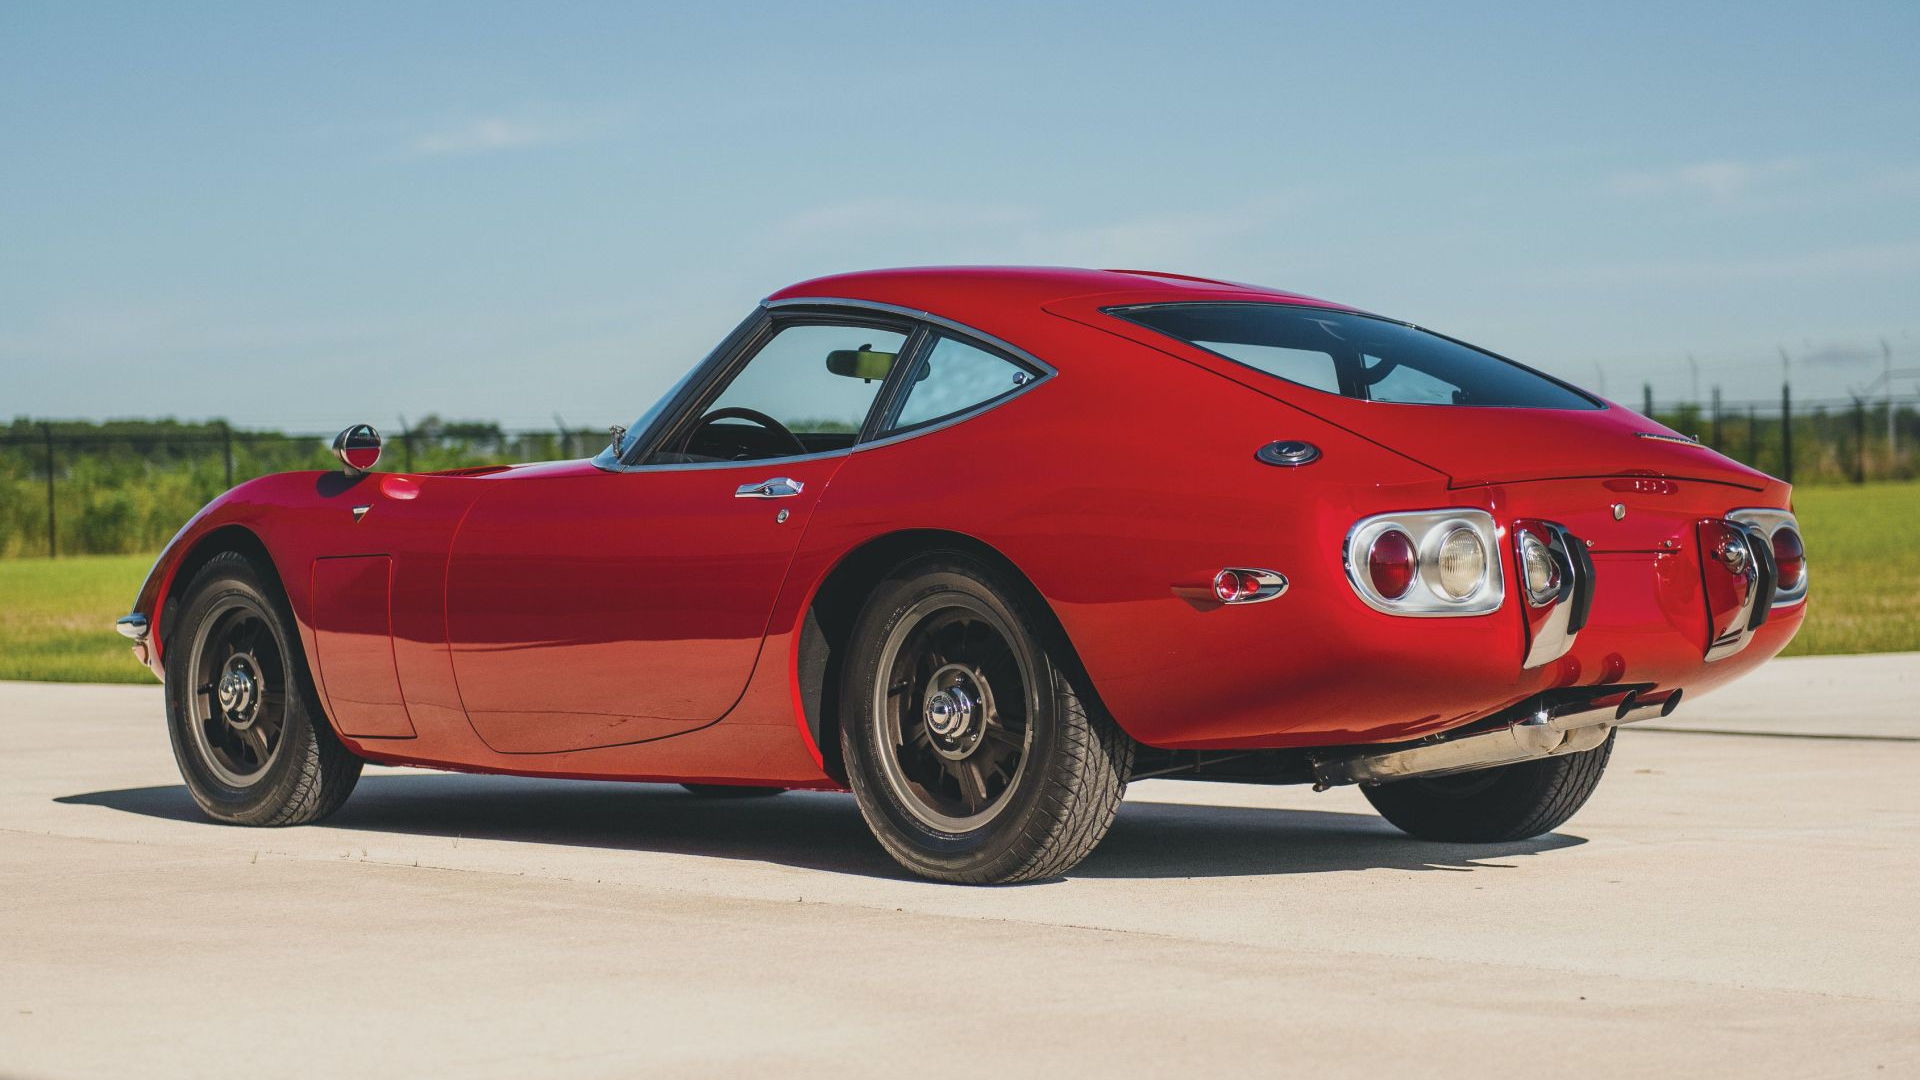 1967 Toyota 2000GT chassis no. MF10-10100  - Photo credit: Darin Schnabel/RM Sotheby's